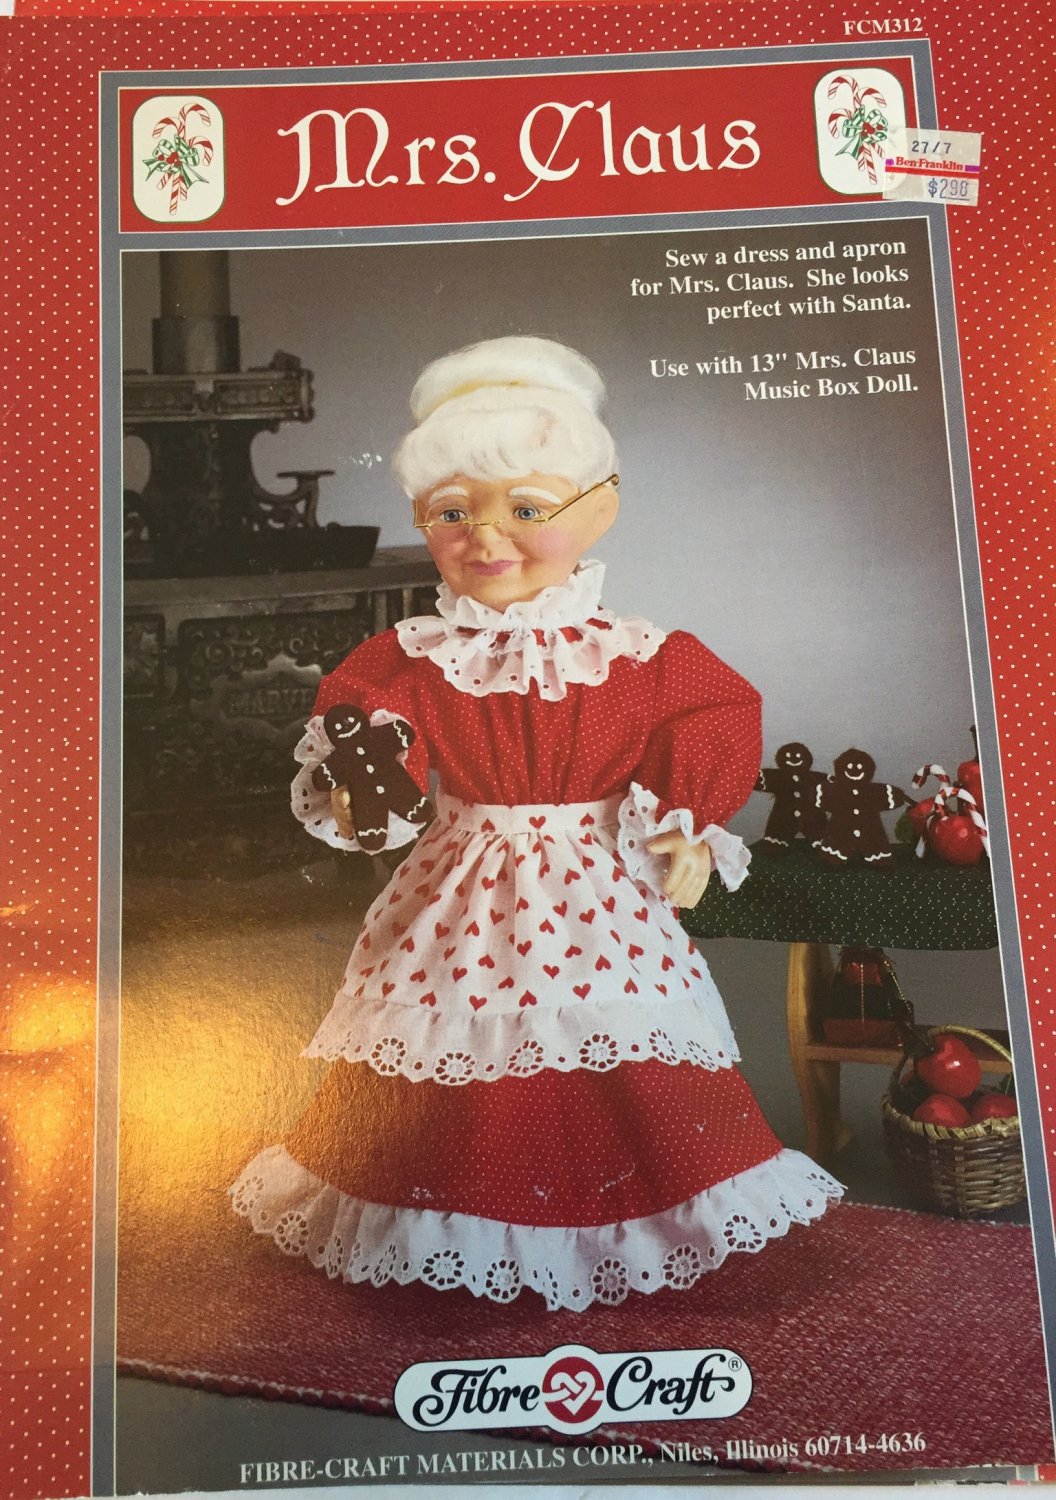 Fibre Craft Mrs. Claus Dress and Apron for 13" Mrs. Claus Music Box Doll Sewing Pattern FCM312